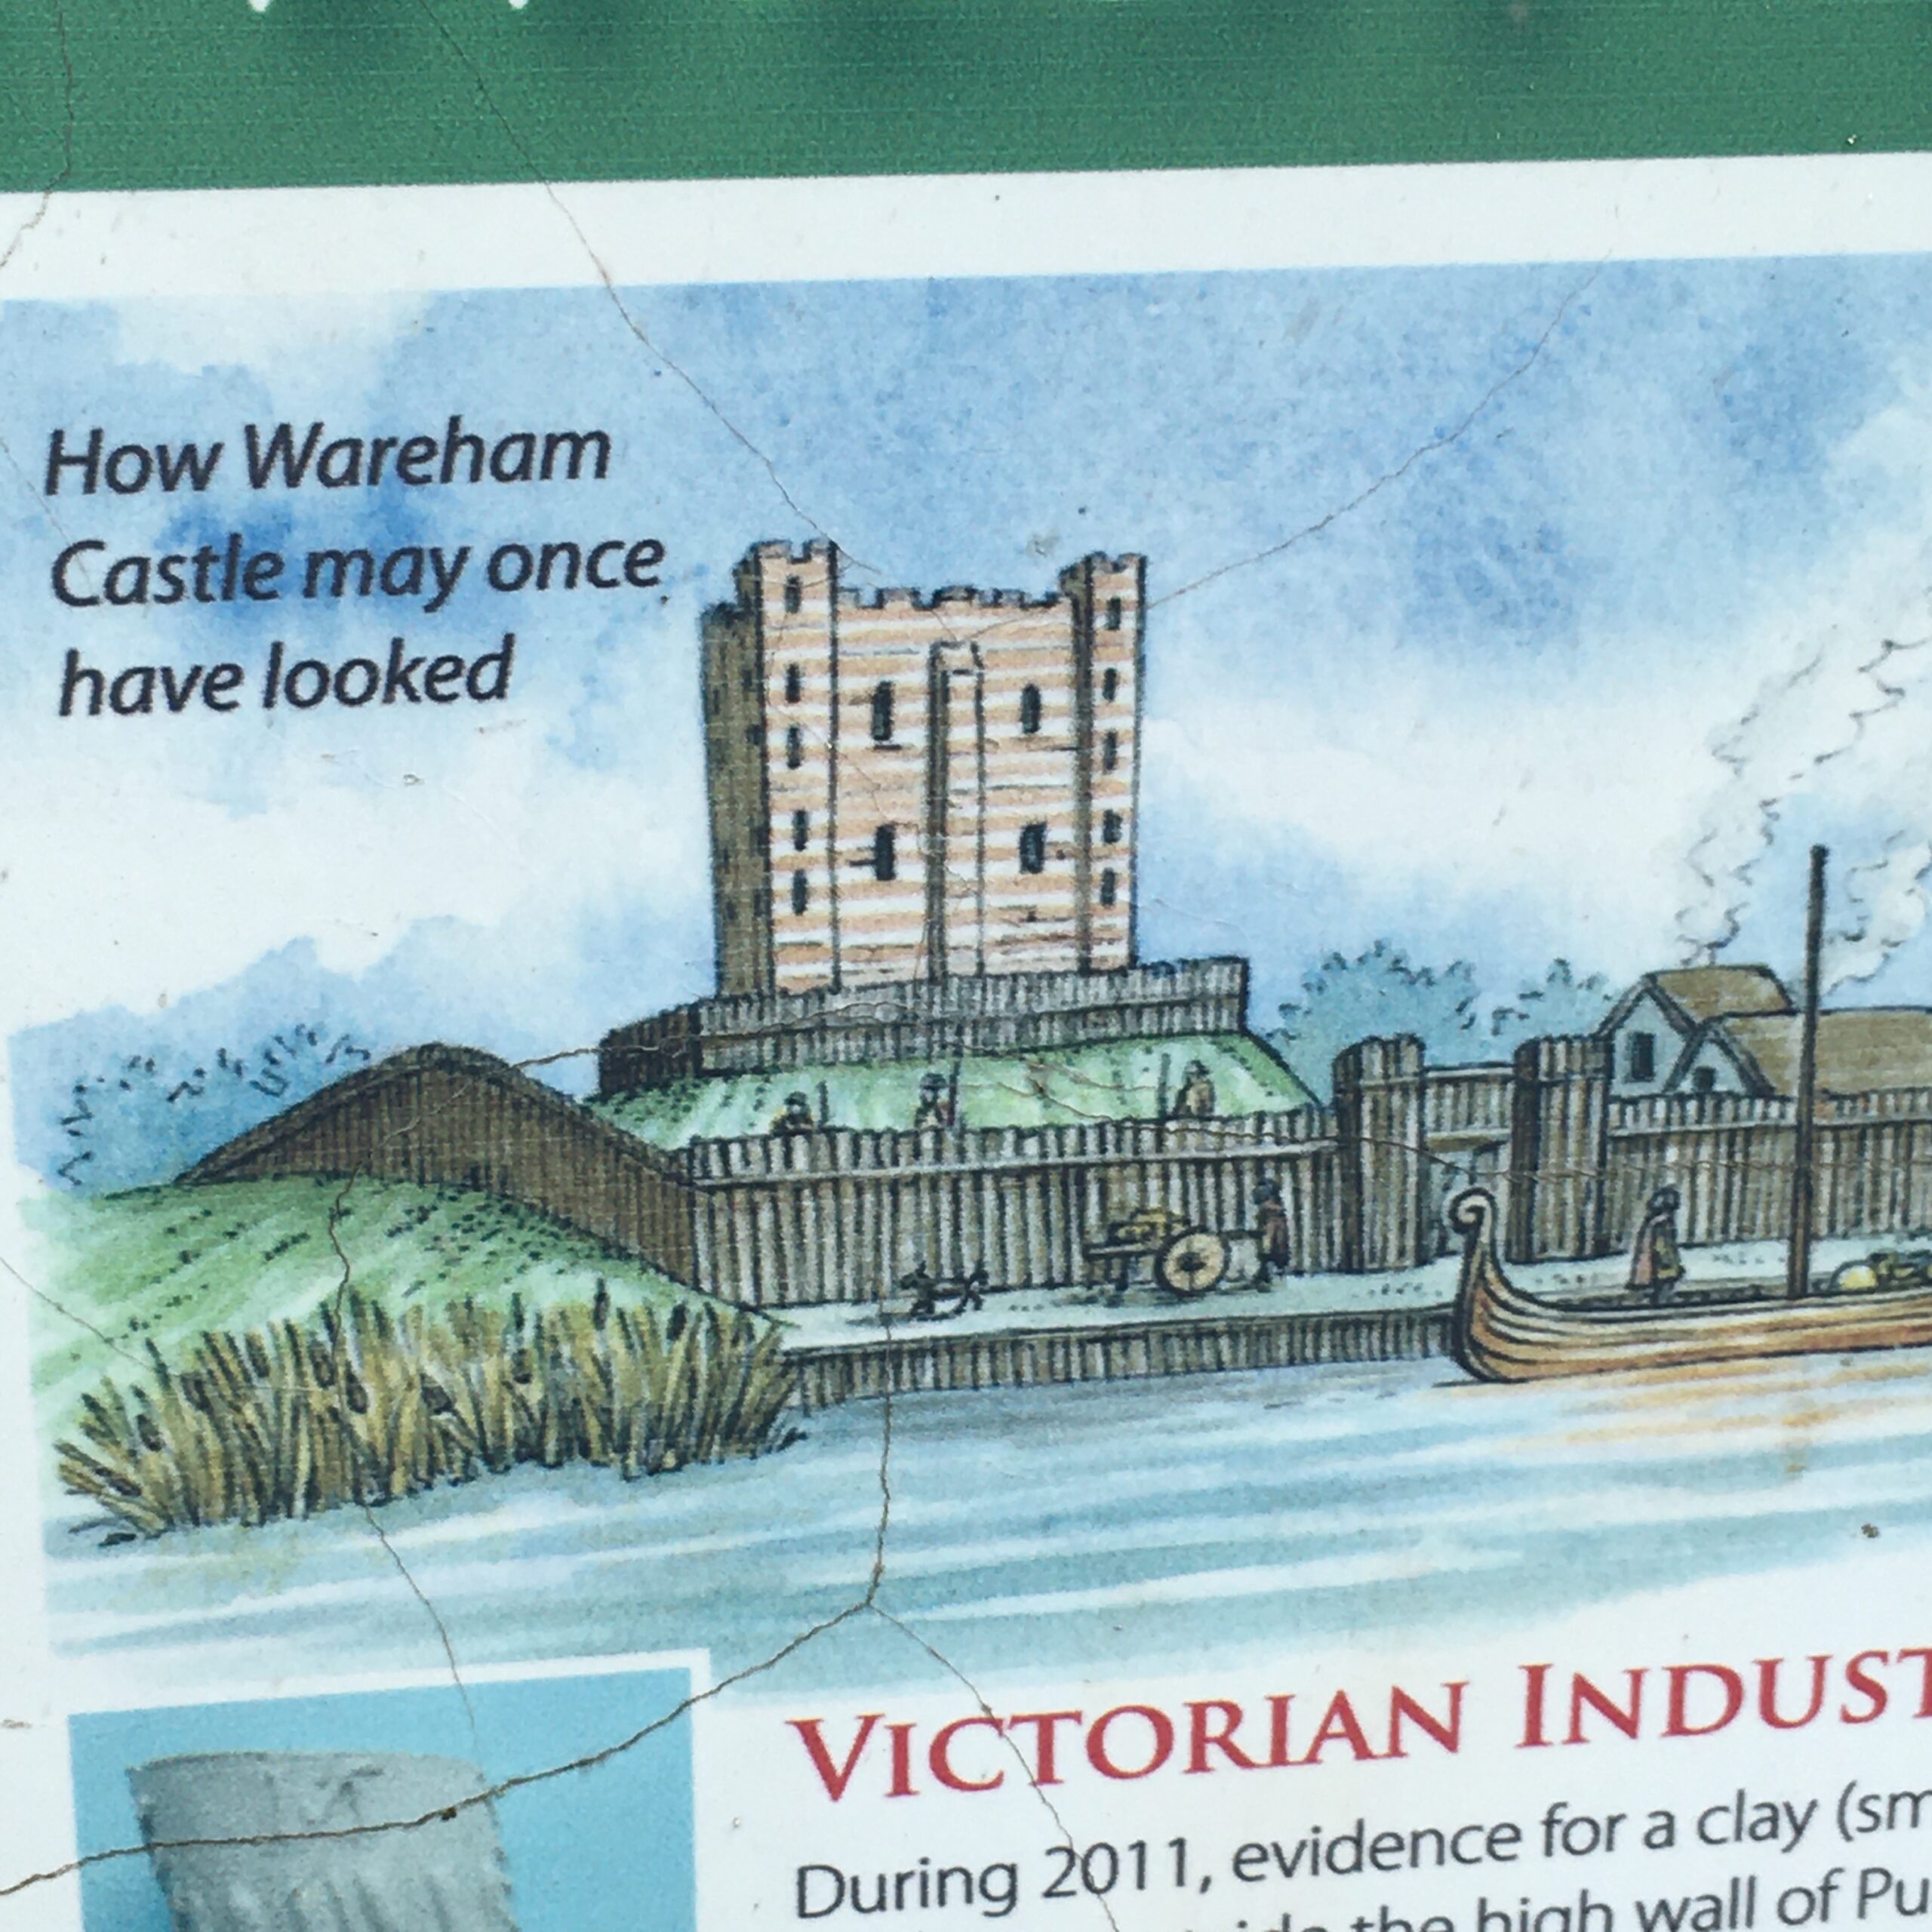 How Wareham Castle may have looked